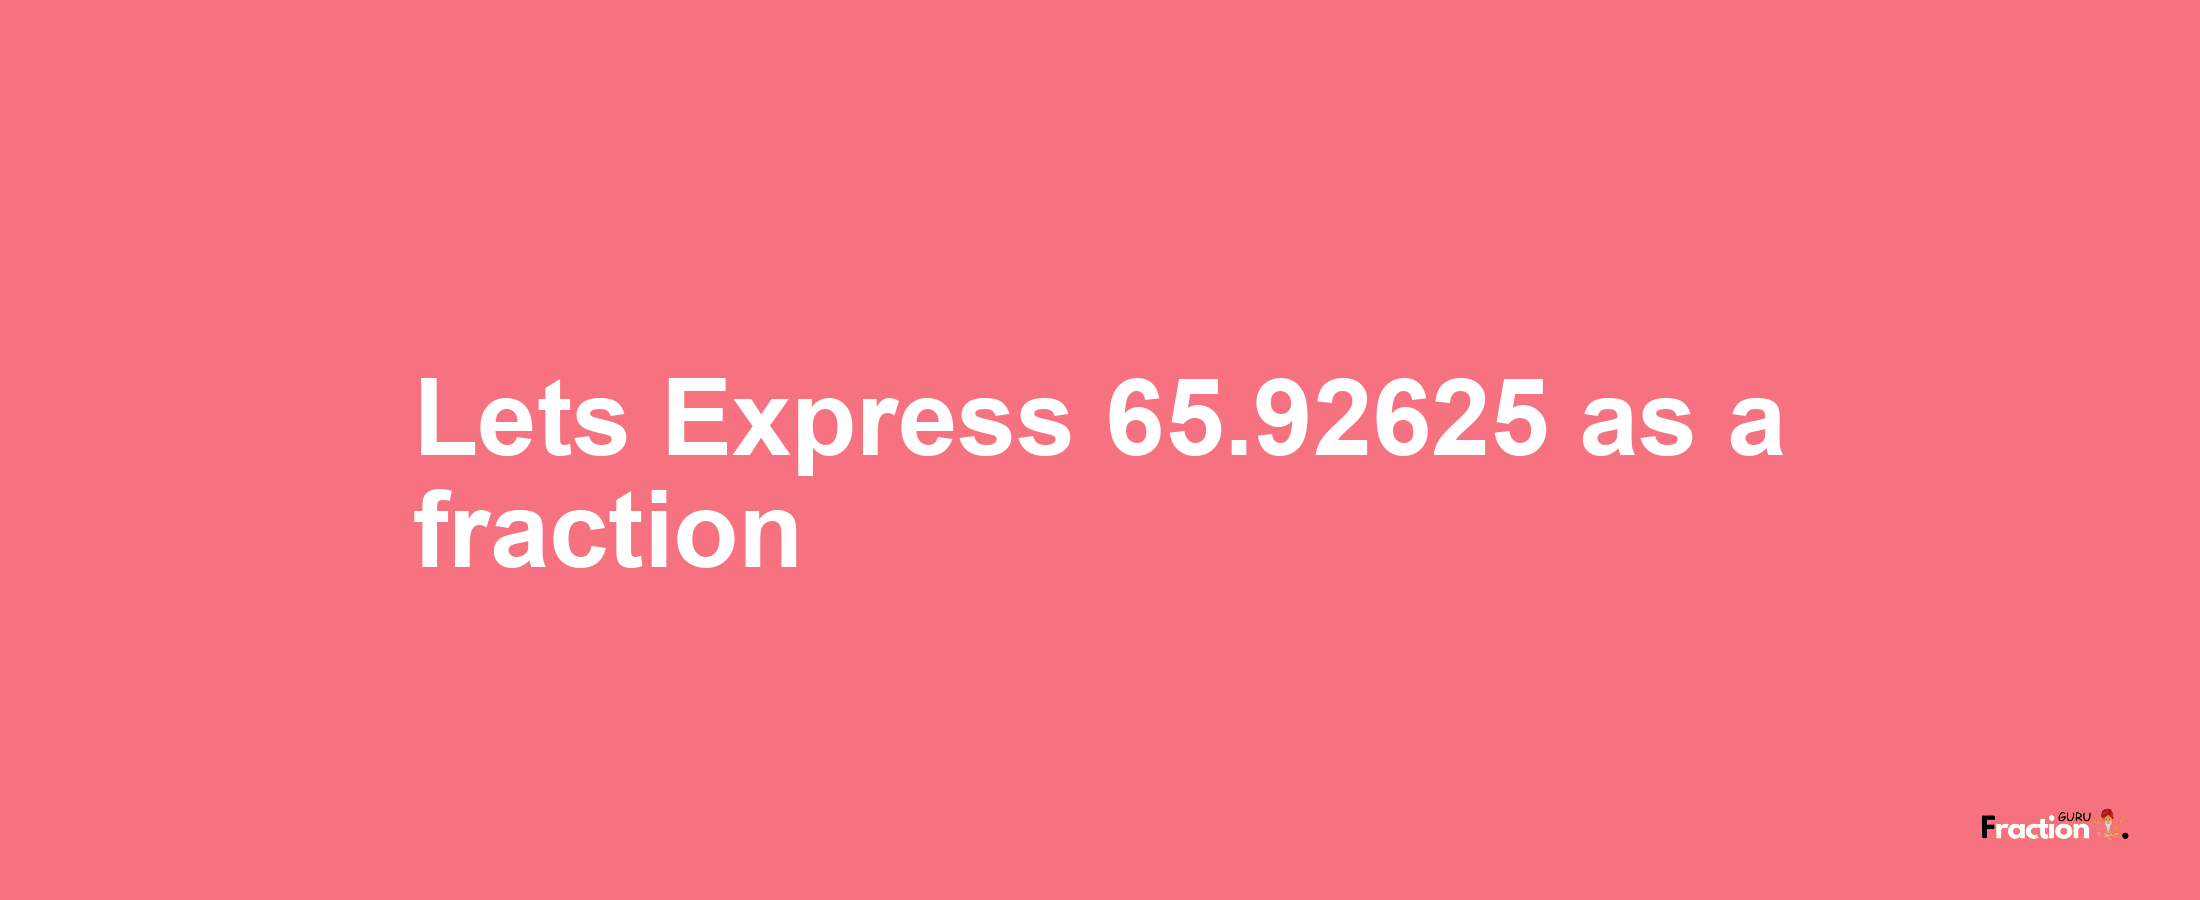 Lets Express 65.92625 as afraction